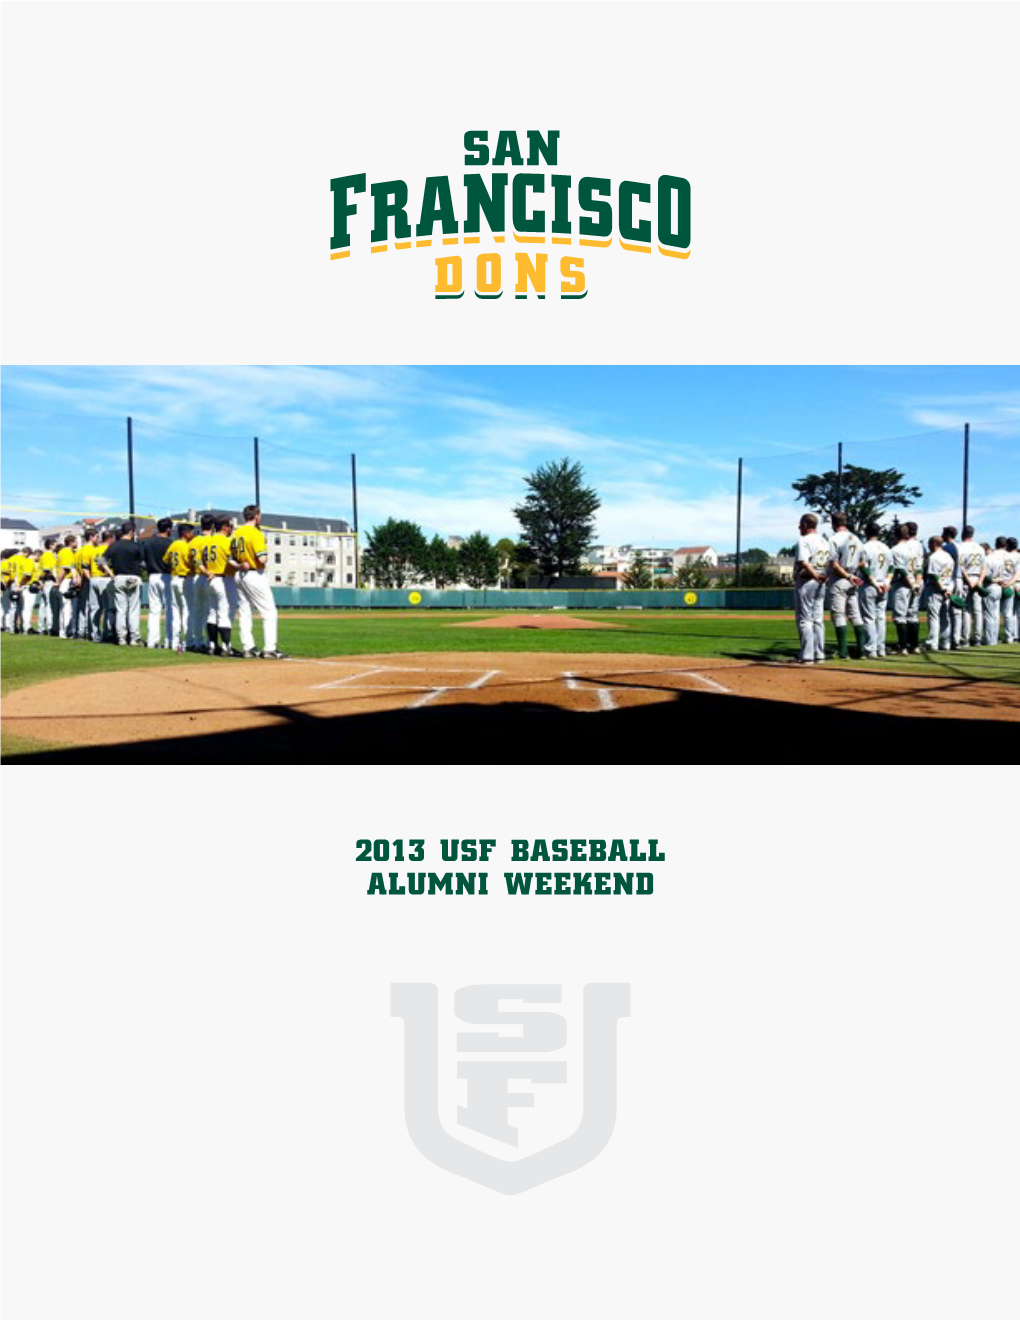 2013 USF BASEBALL ALUMNI WEEKEND 2011, and Having Attended 3 NCAA Regionals in His Tenure, Coach Giarratano and His Program Are Not Content with These Distinctions